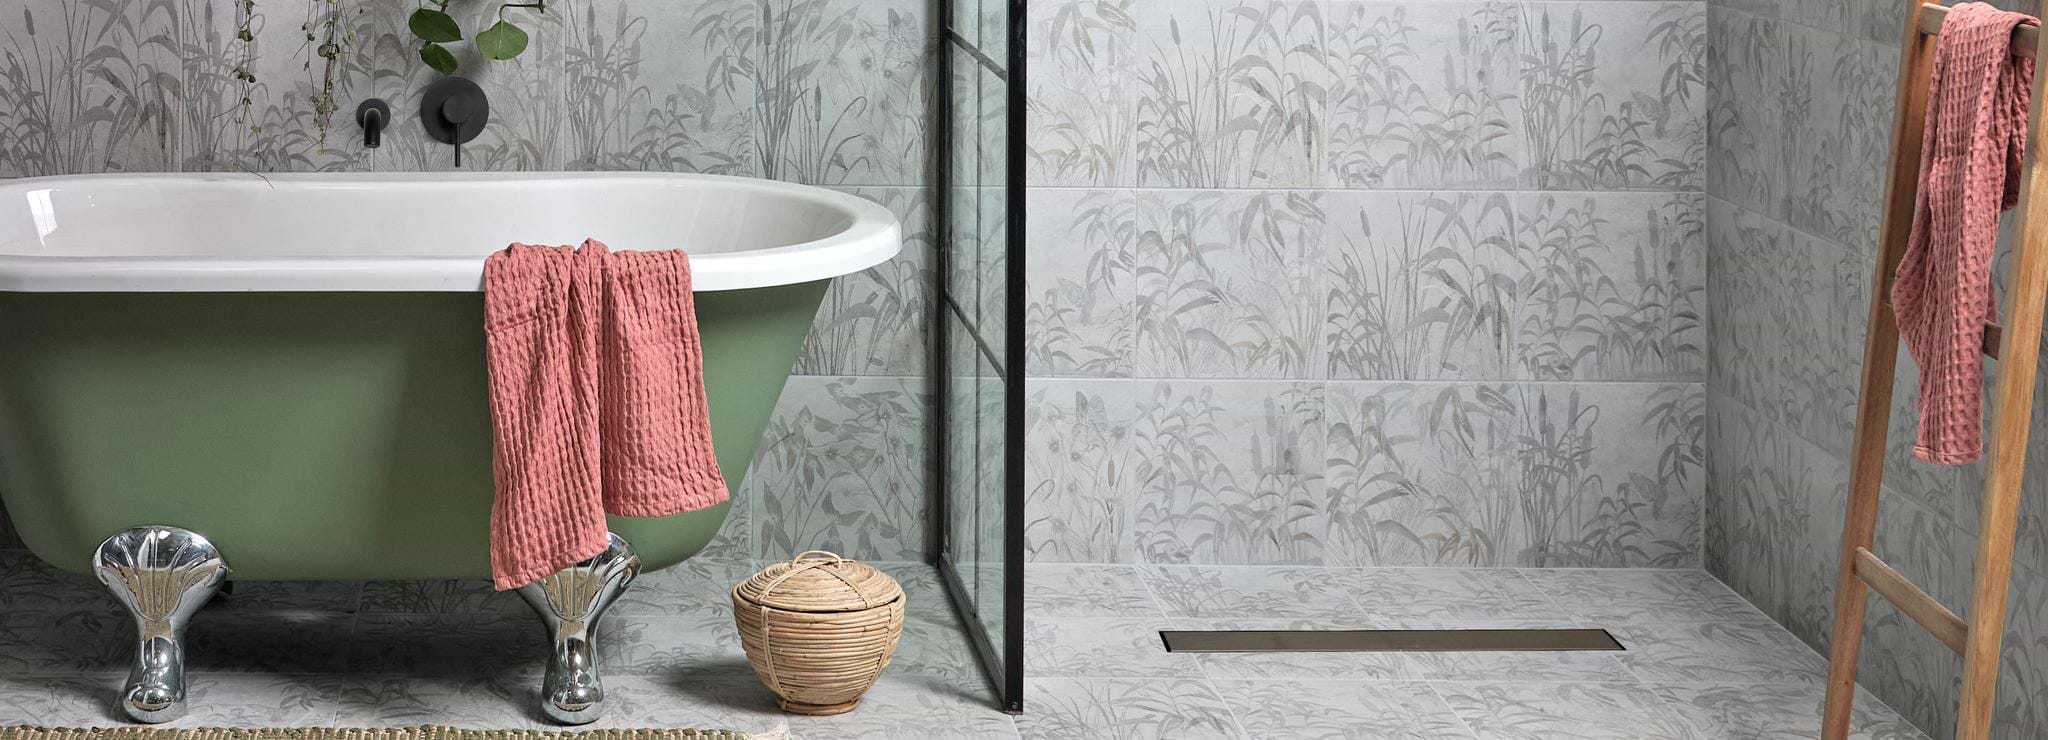 National Trust Tiles Collection - Hyperion Tiles